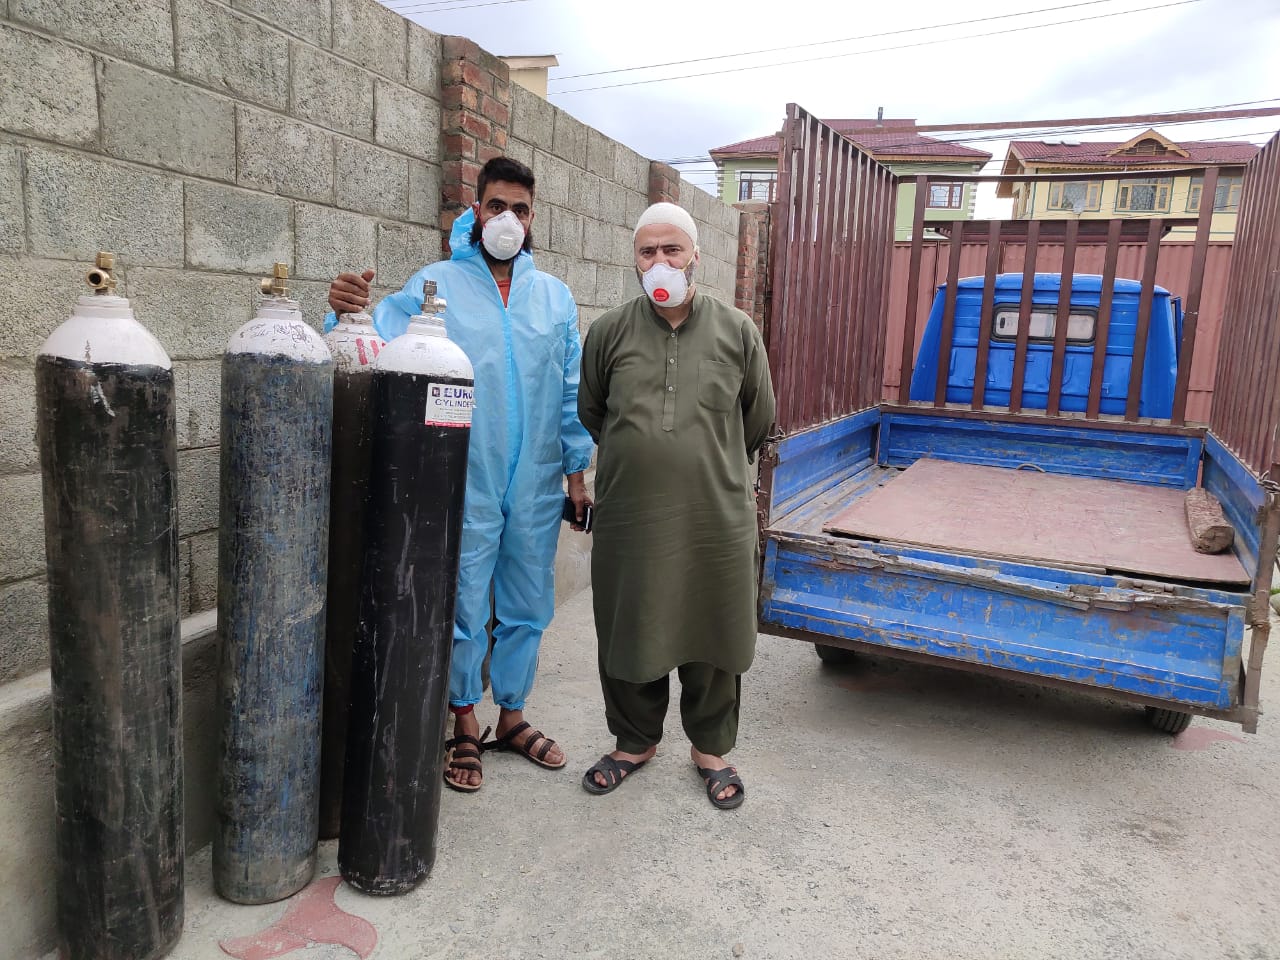 Iqbal Jaan Zargar (right) with his helper Ansar Ahmad in Srinagar. The duo supply oxygen cylinders to needy families across the city for free